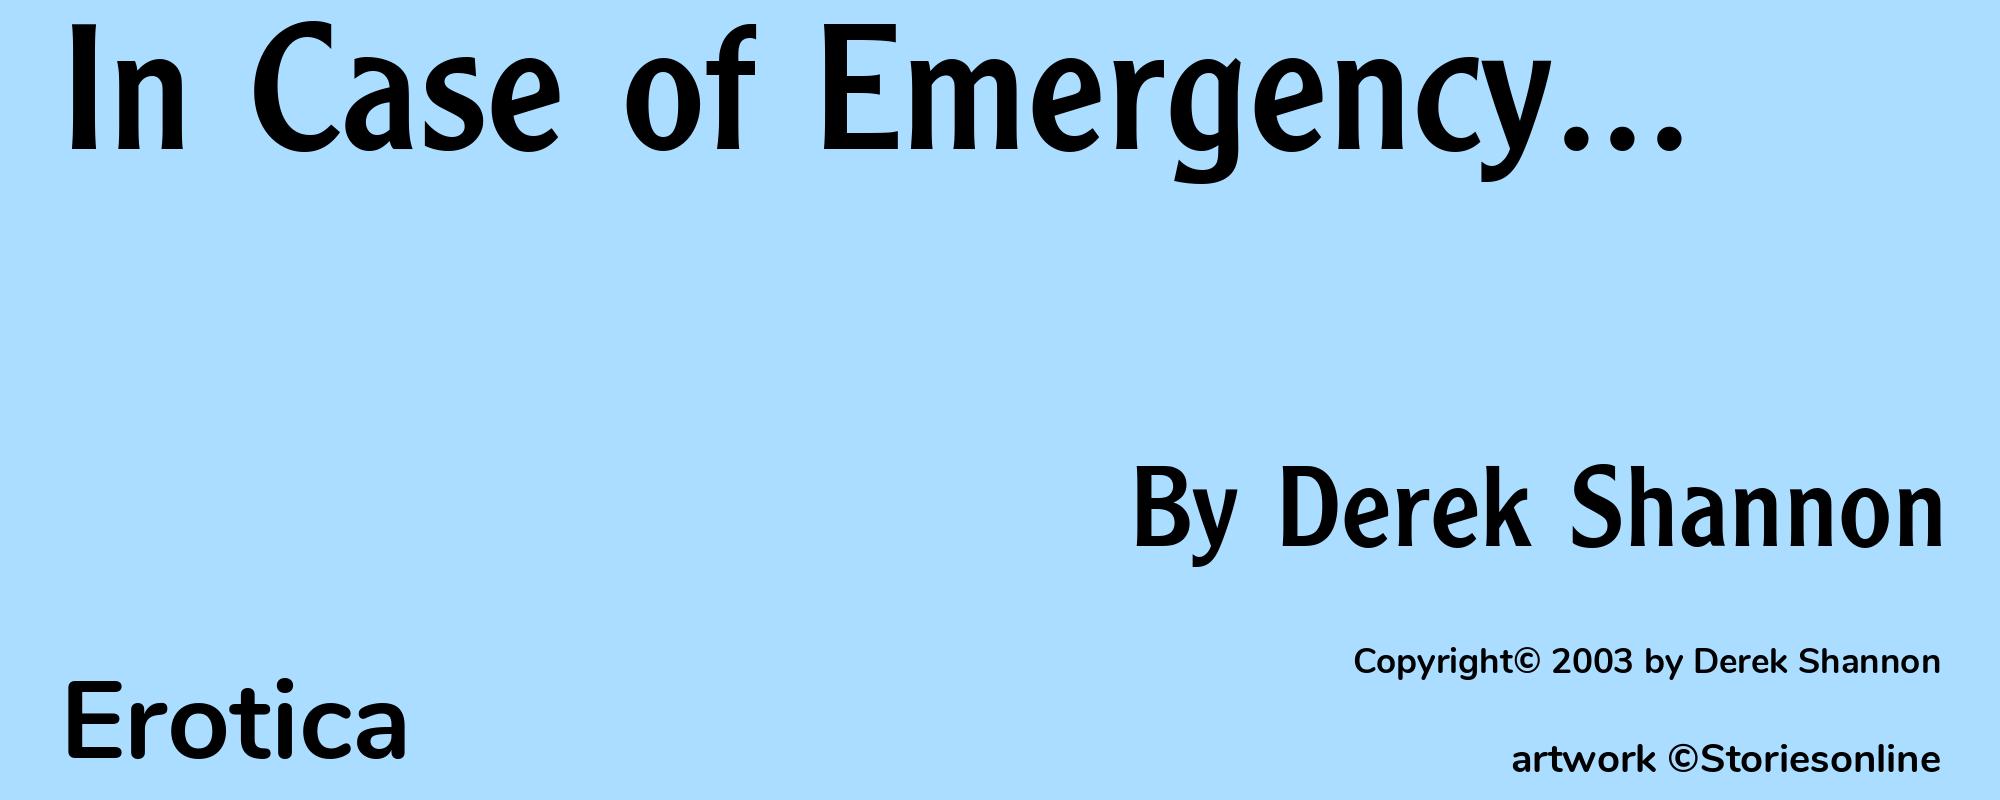 In Case of Emergency... - Cover